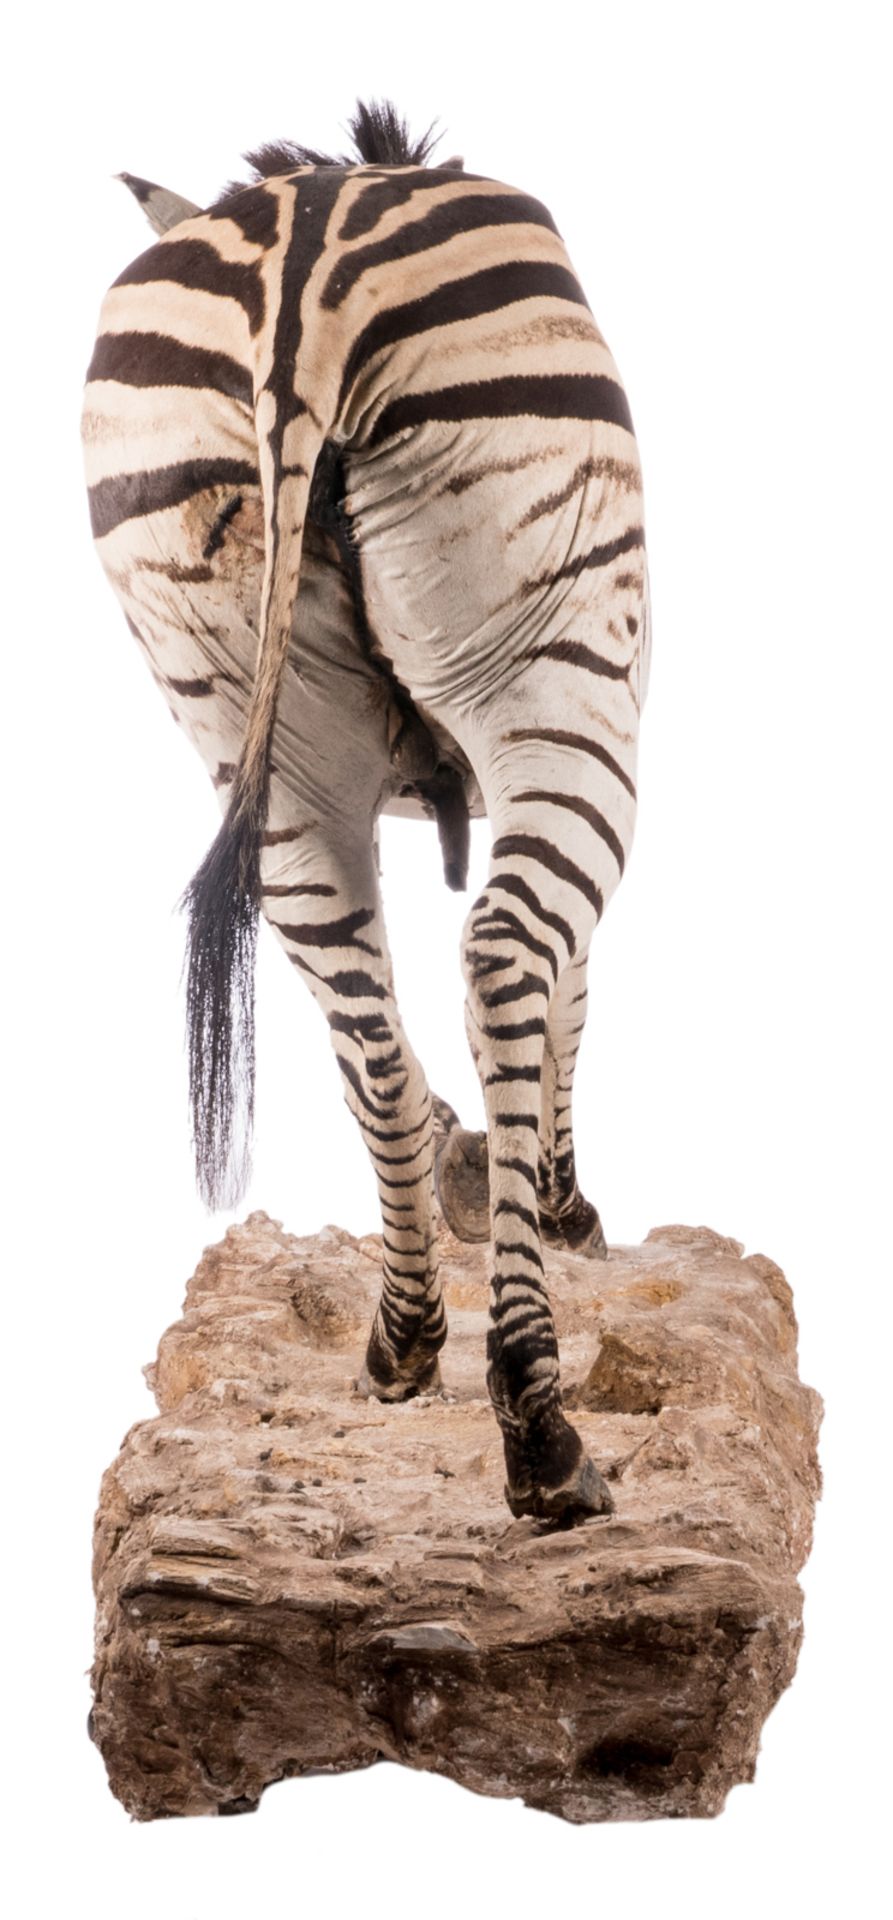 A stuffed zebra, H 114 (without base) - 132 (with base) - W 212 cm - Image 5 of 7